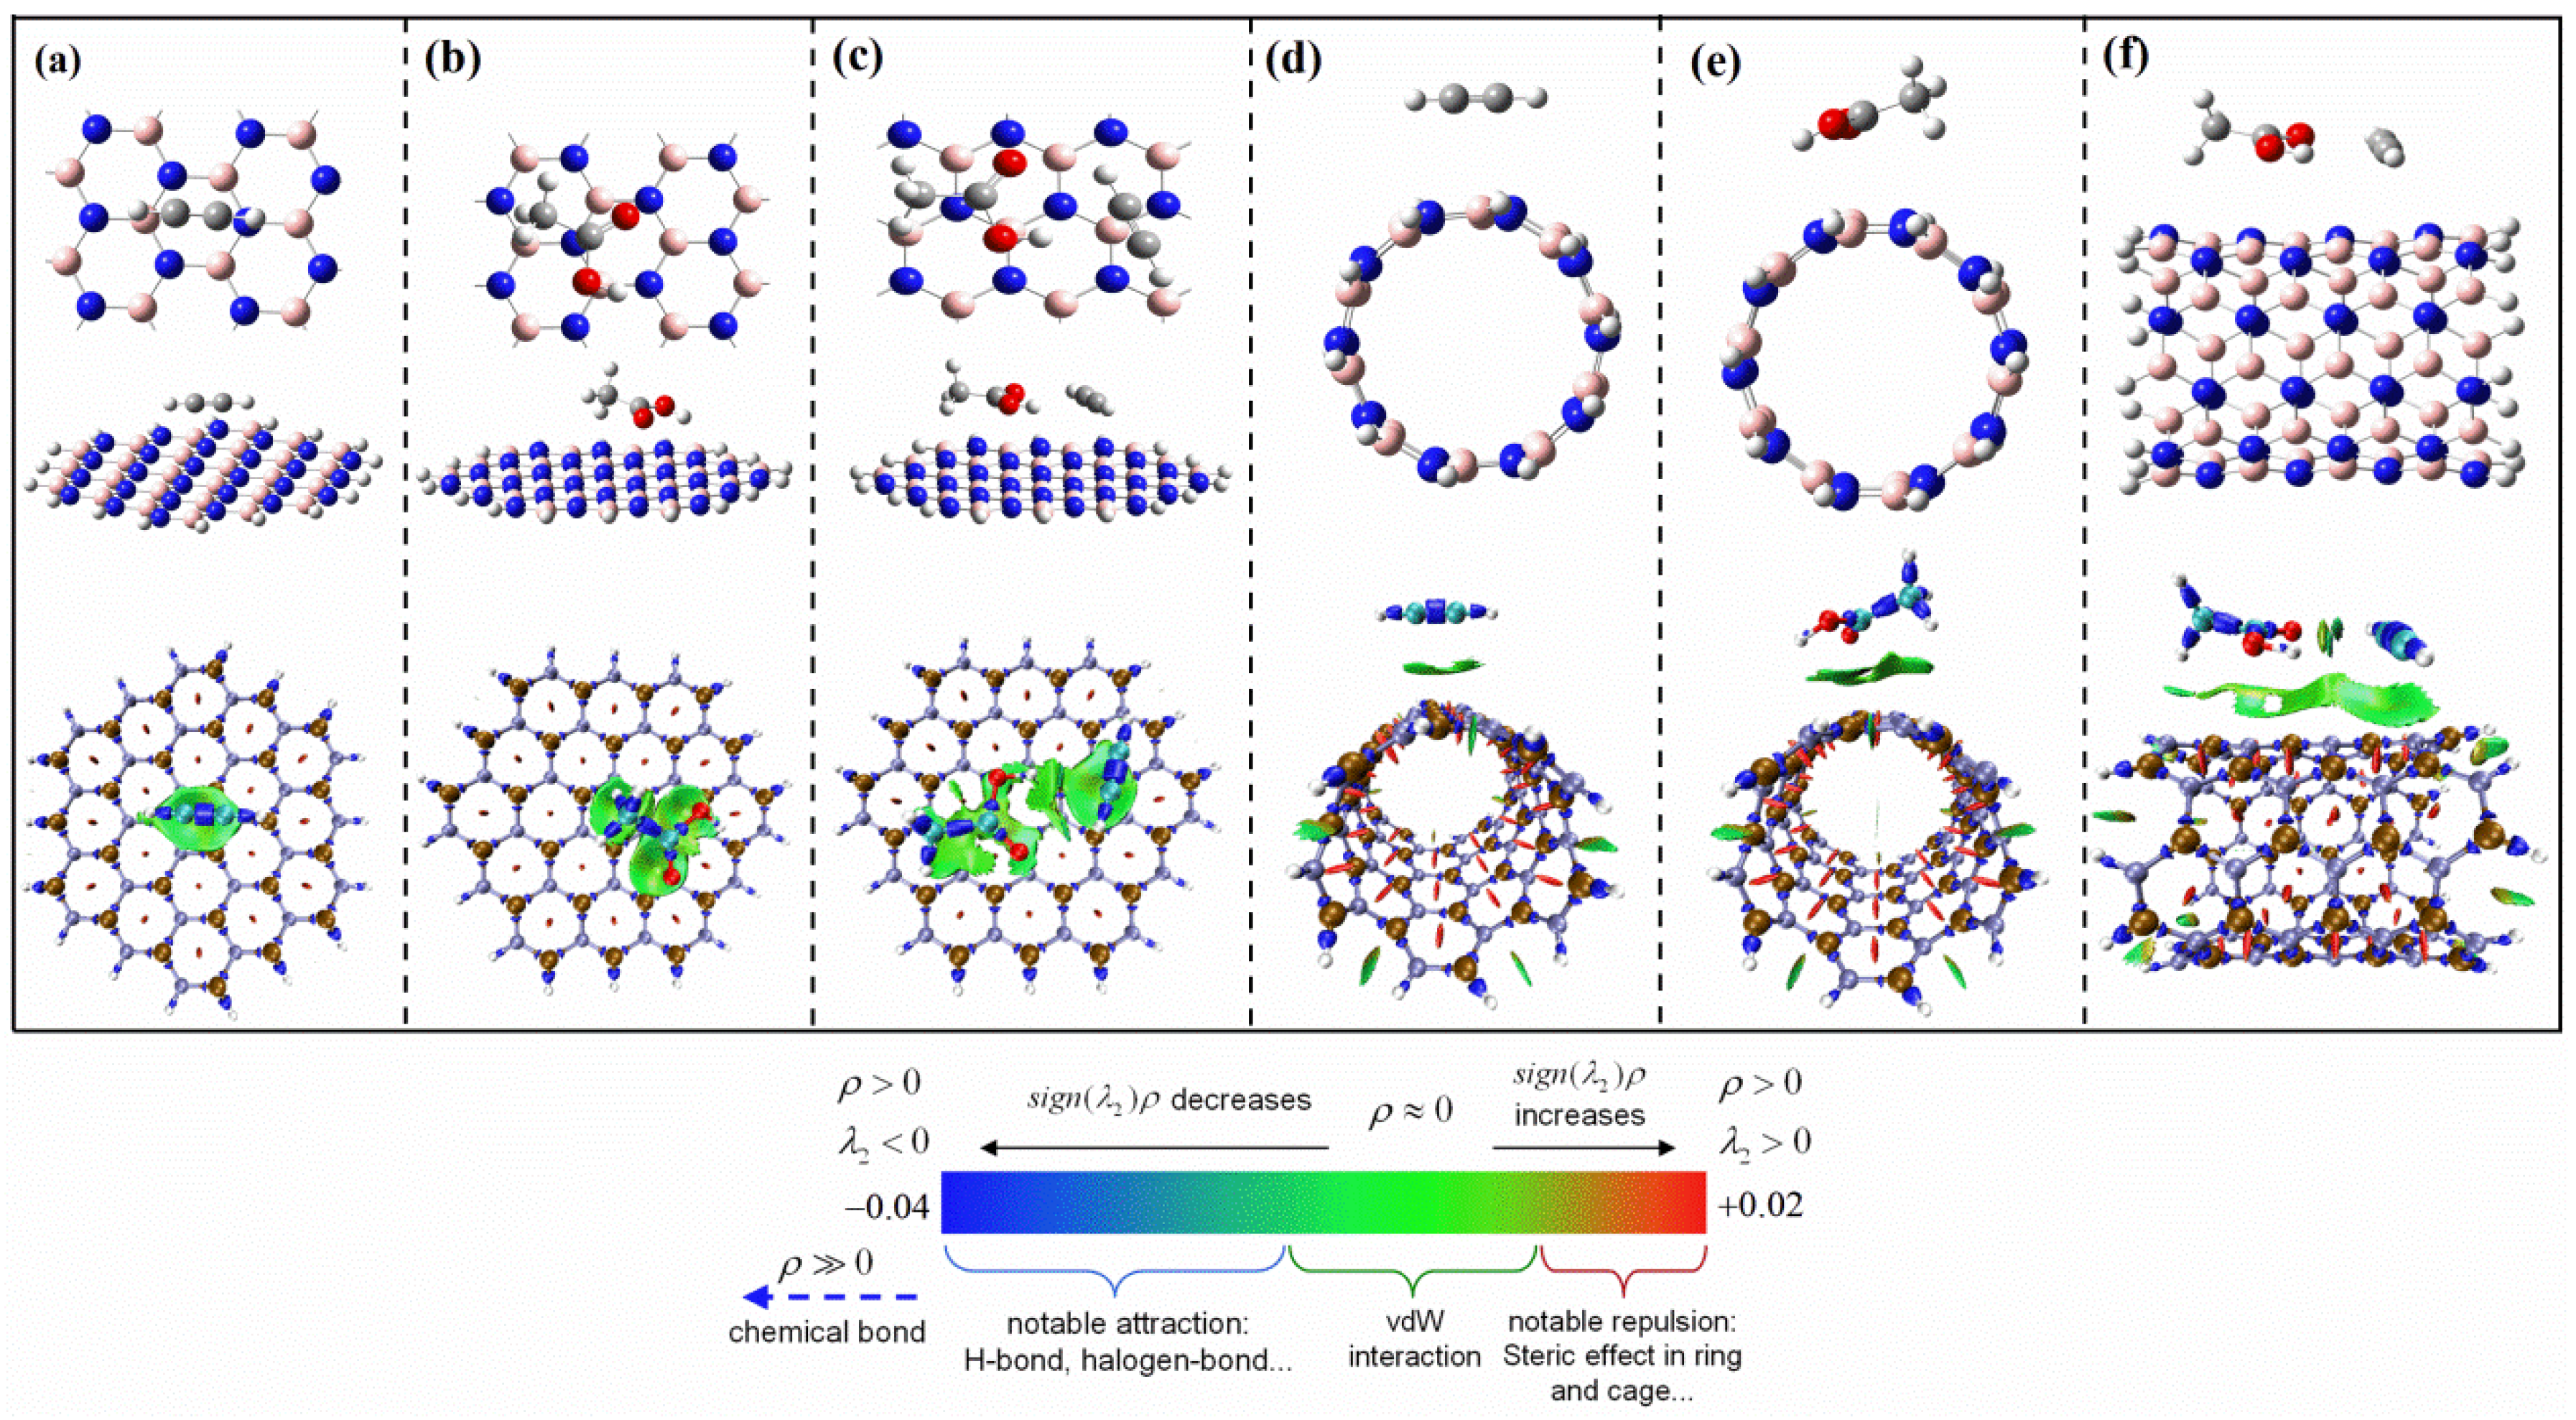 IJMS | Free Full-Text | Density Functional Theory Study of Low-Dimensional (2D, 1D, 0D) Boron Nitride Nanomaterials Catalyzing Acetylene Acetate Reaction